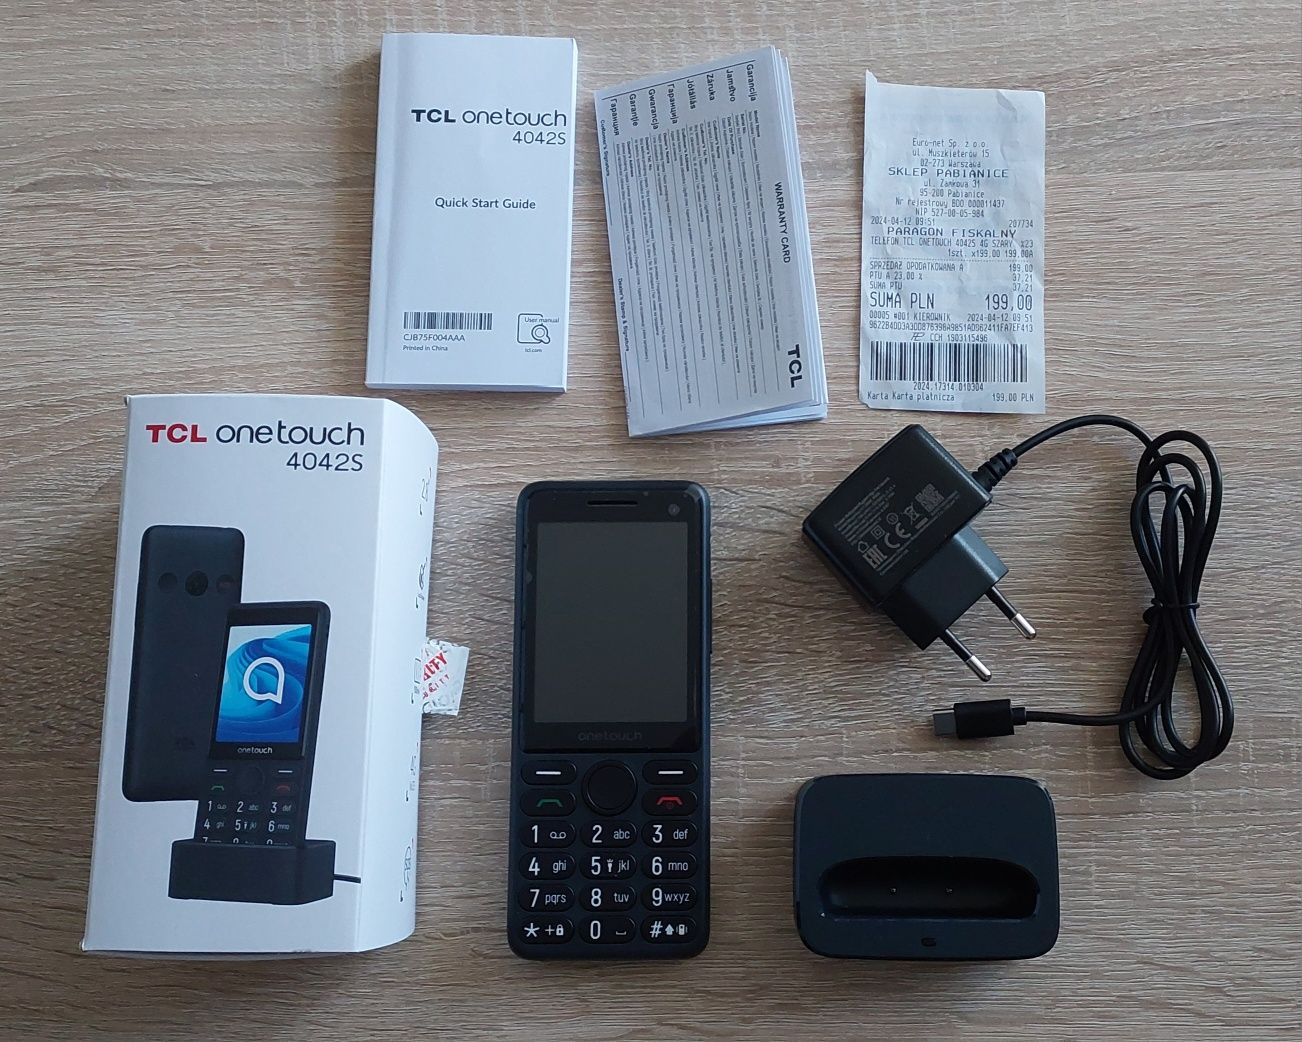 Telefon TCL onetouch 4042s. Nowy.